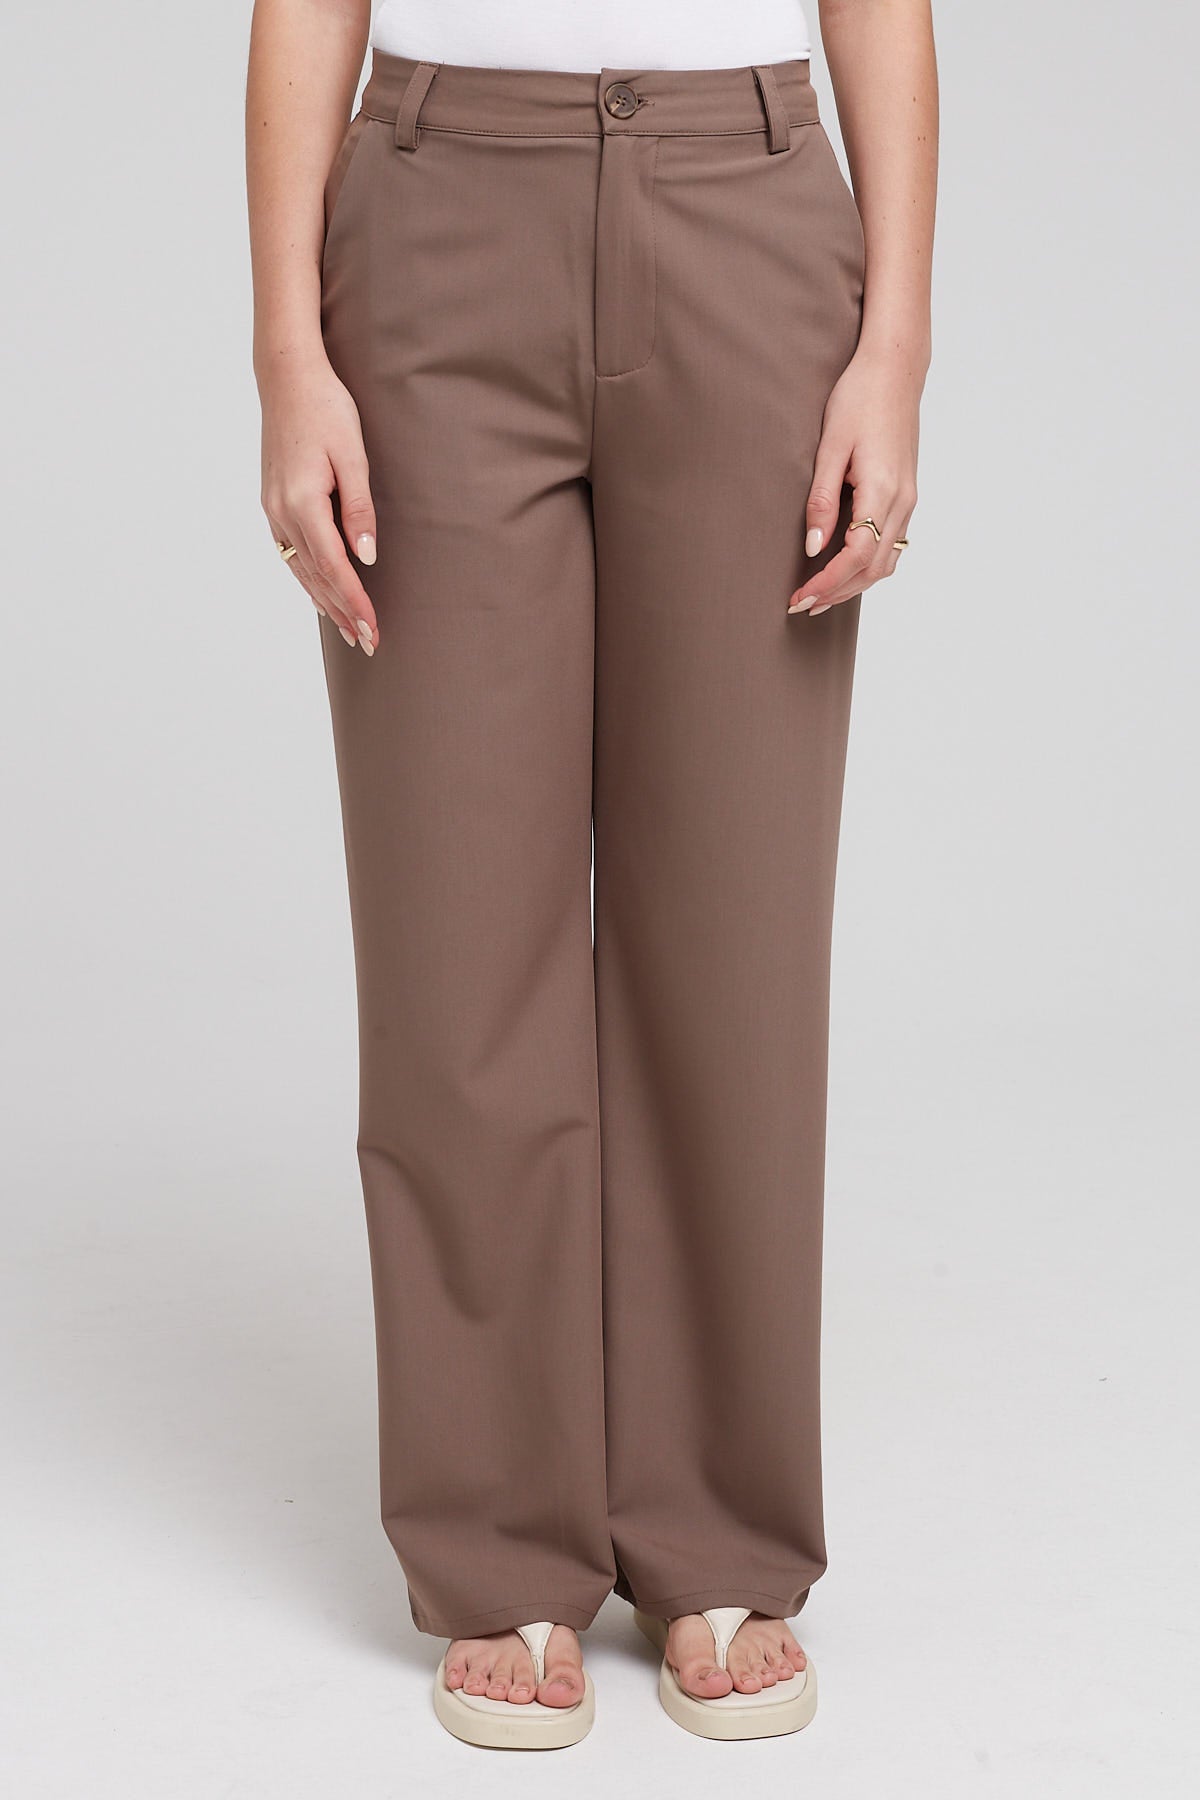 Perfect Stranger Locale Pant Brown – Universal Store